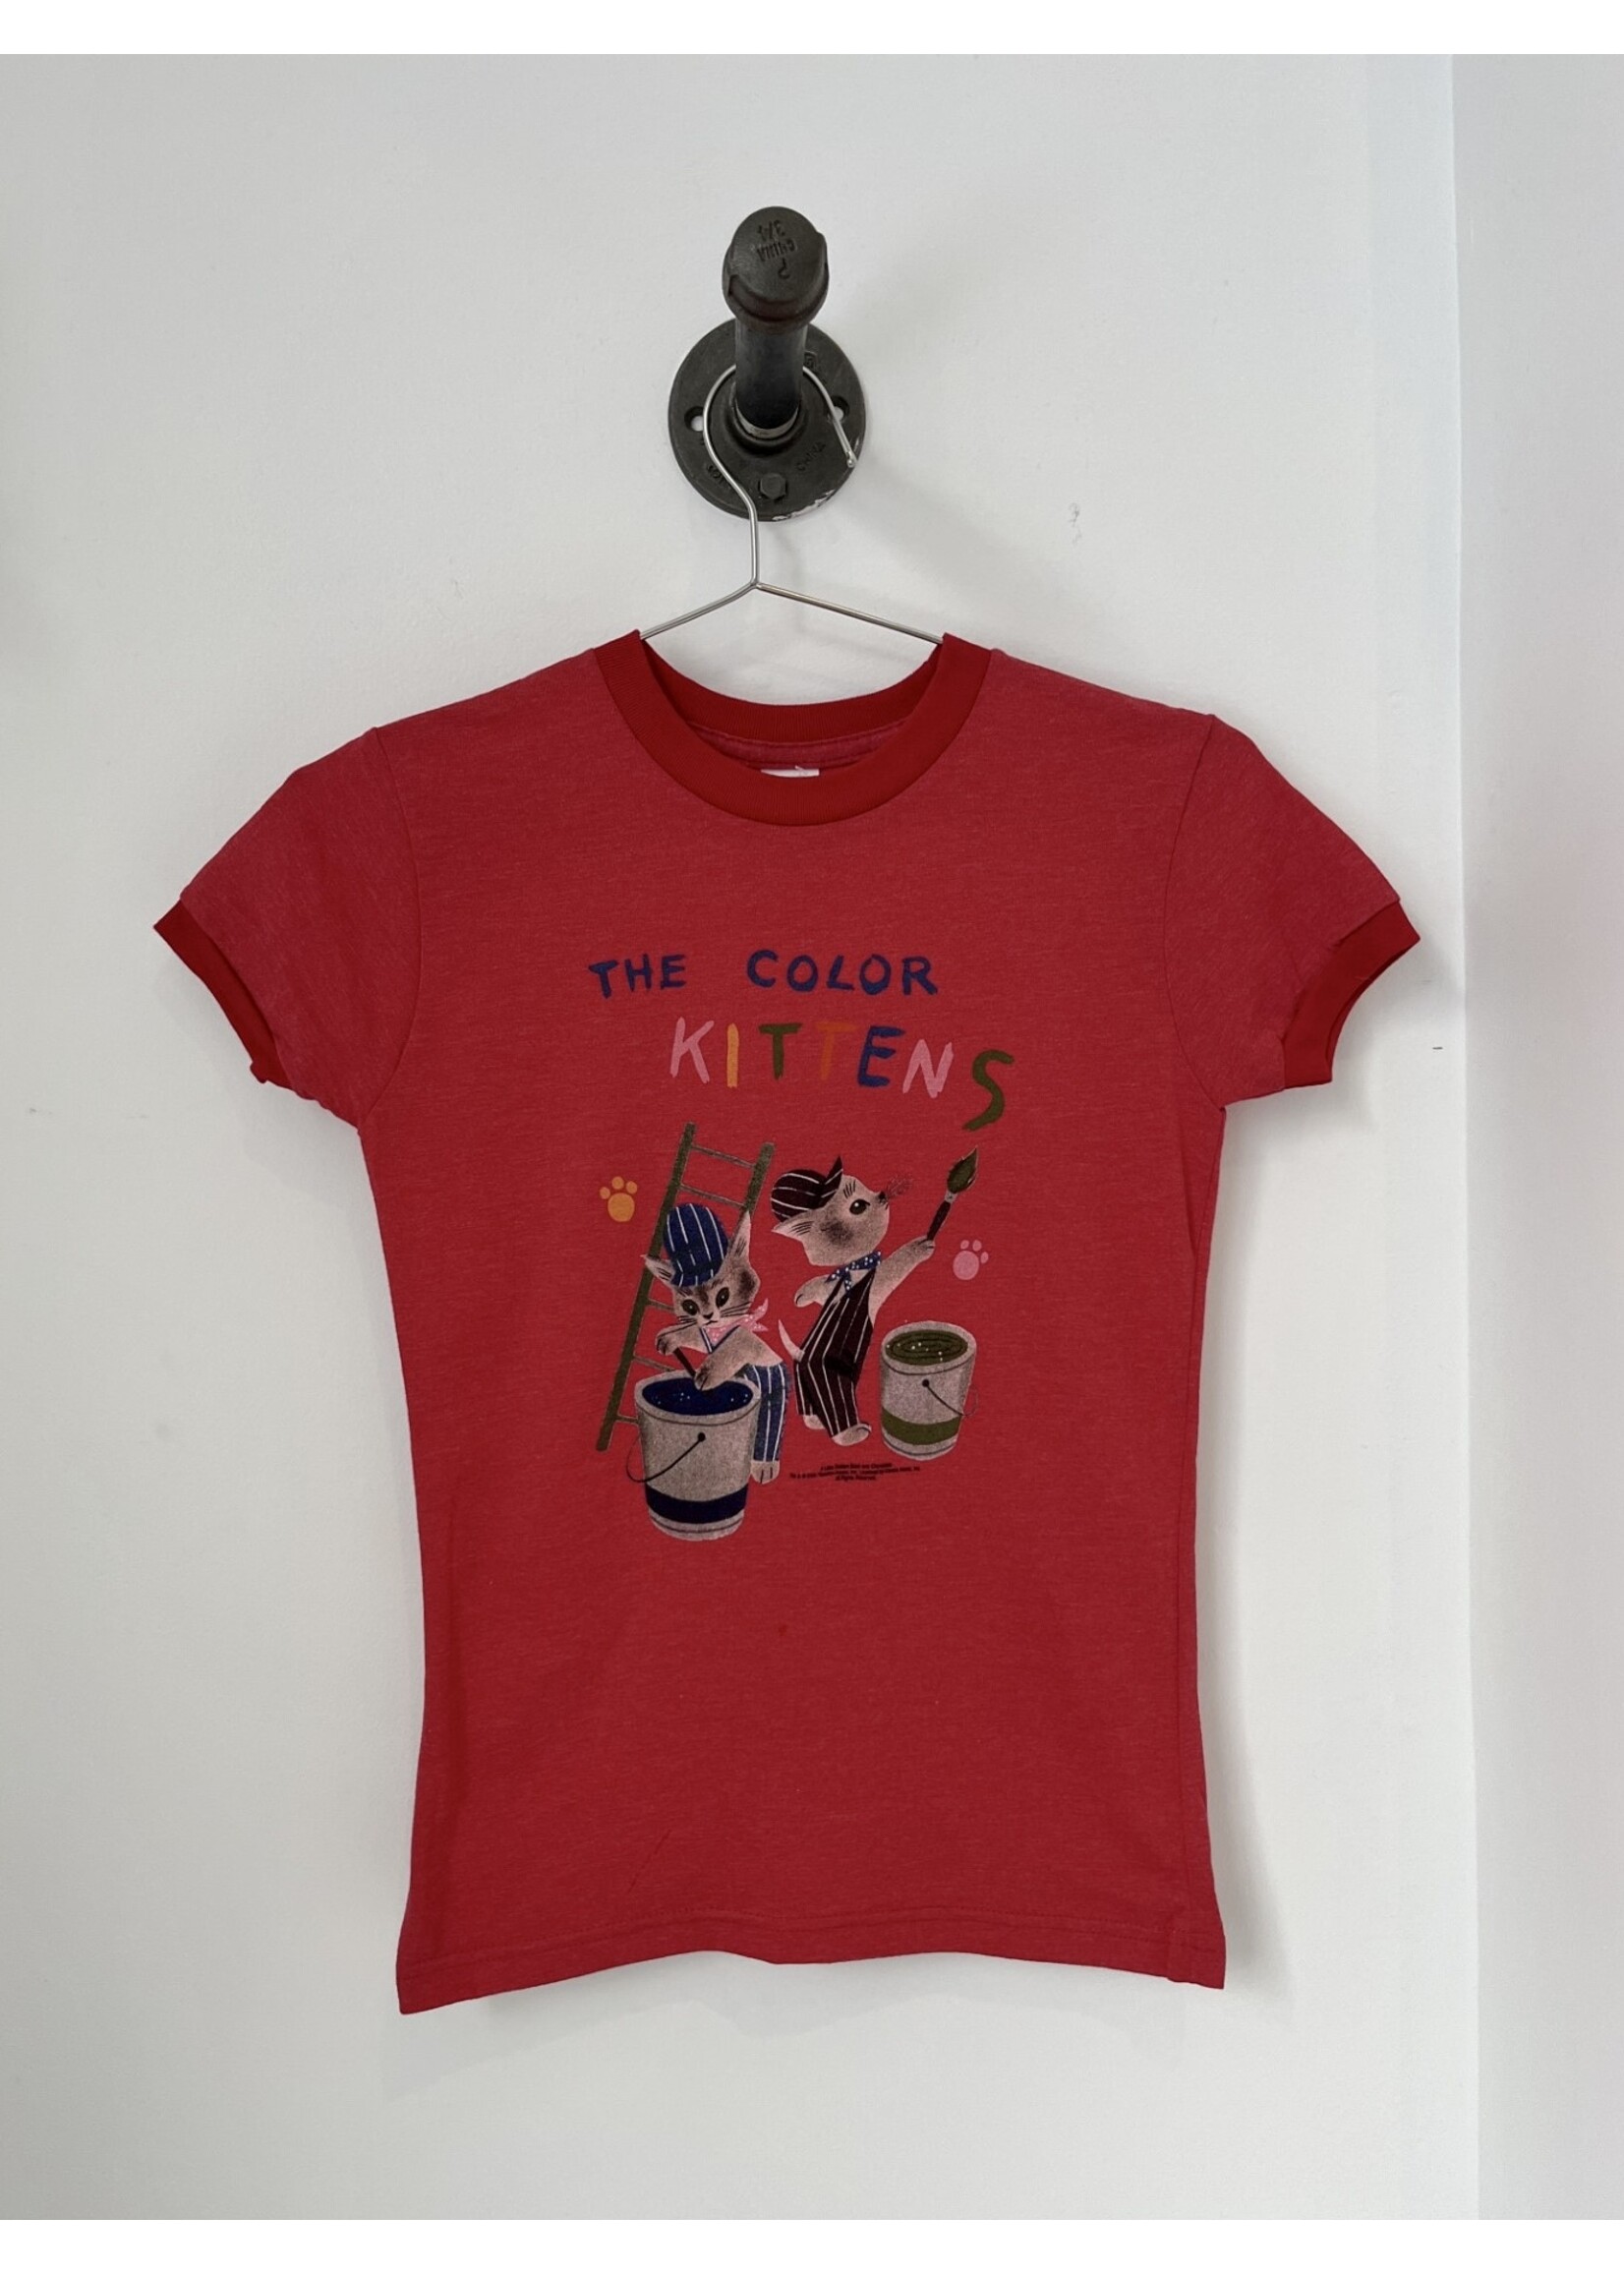 Annex Vintage "The Color Kittens" deadstock red baby tee